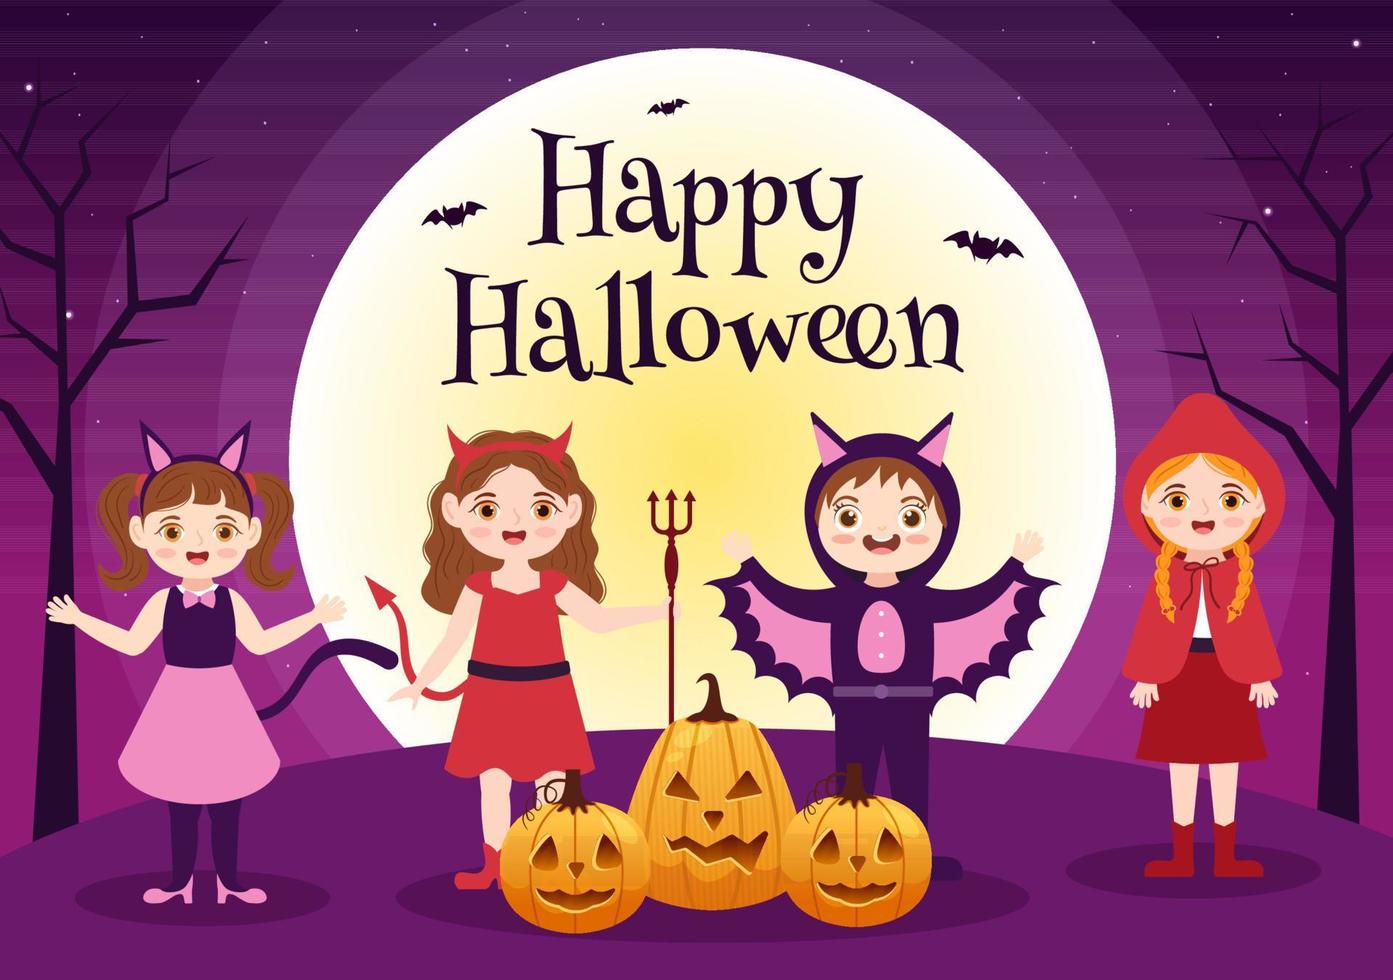 Happy Halloween Template Background Hand Drawn Cartoon Flat Illustration with Children Wearing Various Costumes, Haunted House, Pumpkins, Bats and Full Moon vector